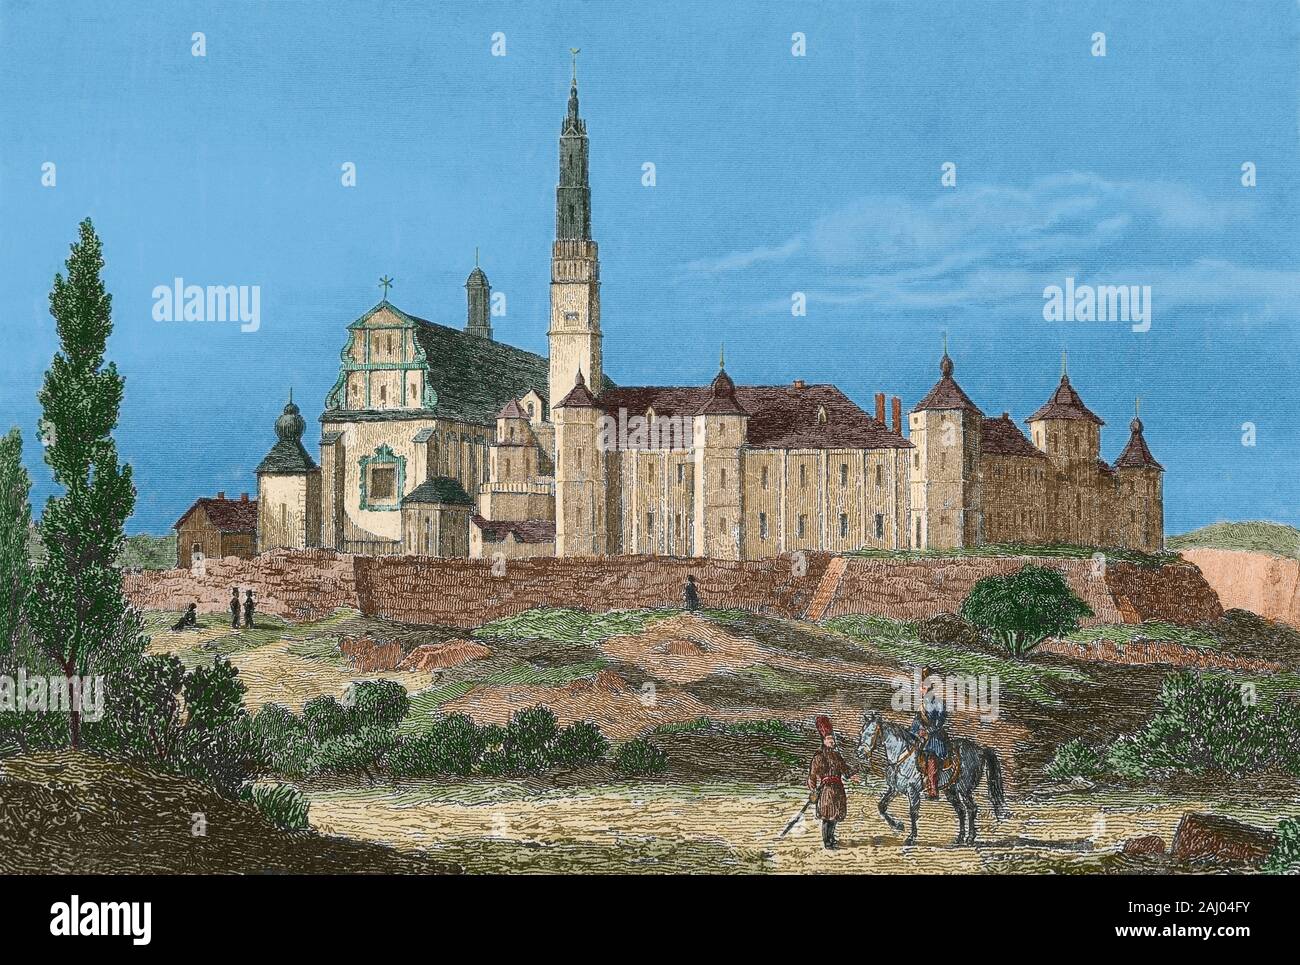 Poland, Czestochowa. Church and convent of Jasna Gora. Monastery. It was founded in 1382 by Pauline monks who was brought from Hungary to Poland by Prince Ladislaus of Opole. Engraving by Lalaisse, 1840. Later colouration. Stock Photo